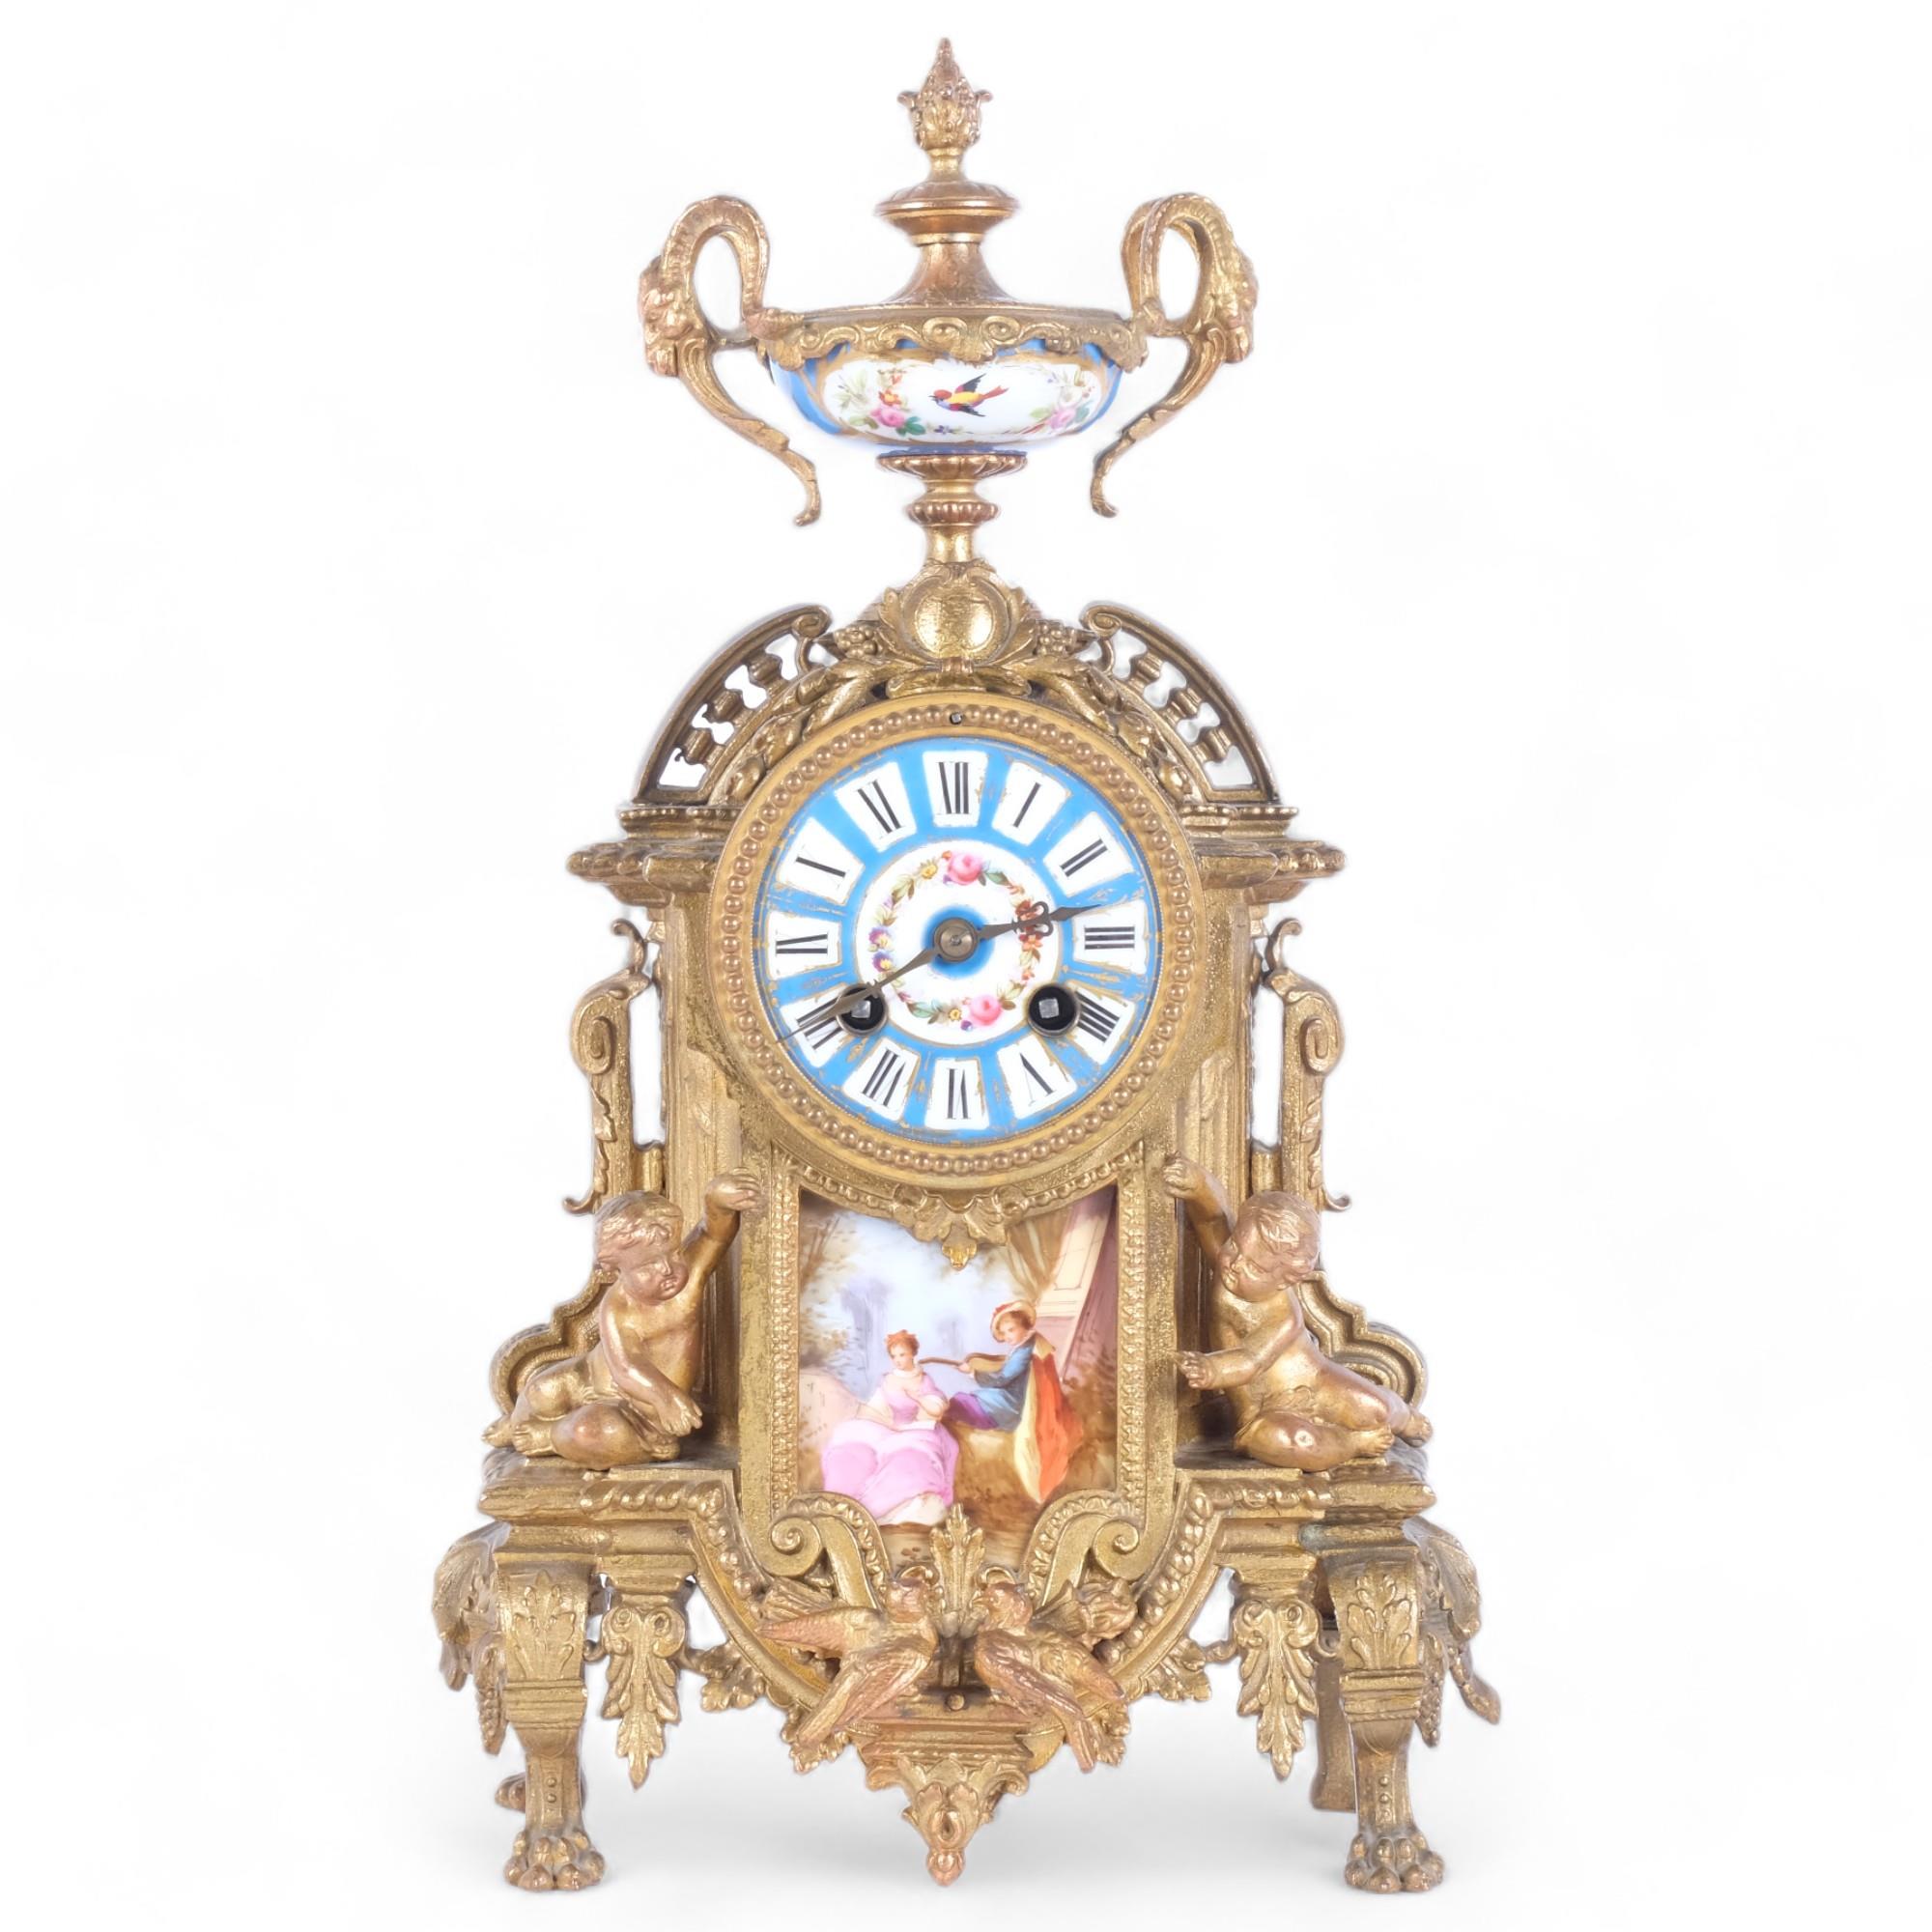 A 19th century French gilt-metal mantel clock, 8-day striking movement, with painted dial and